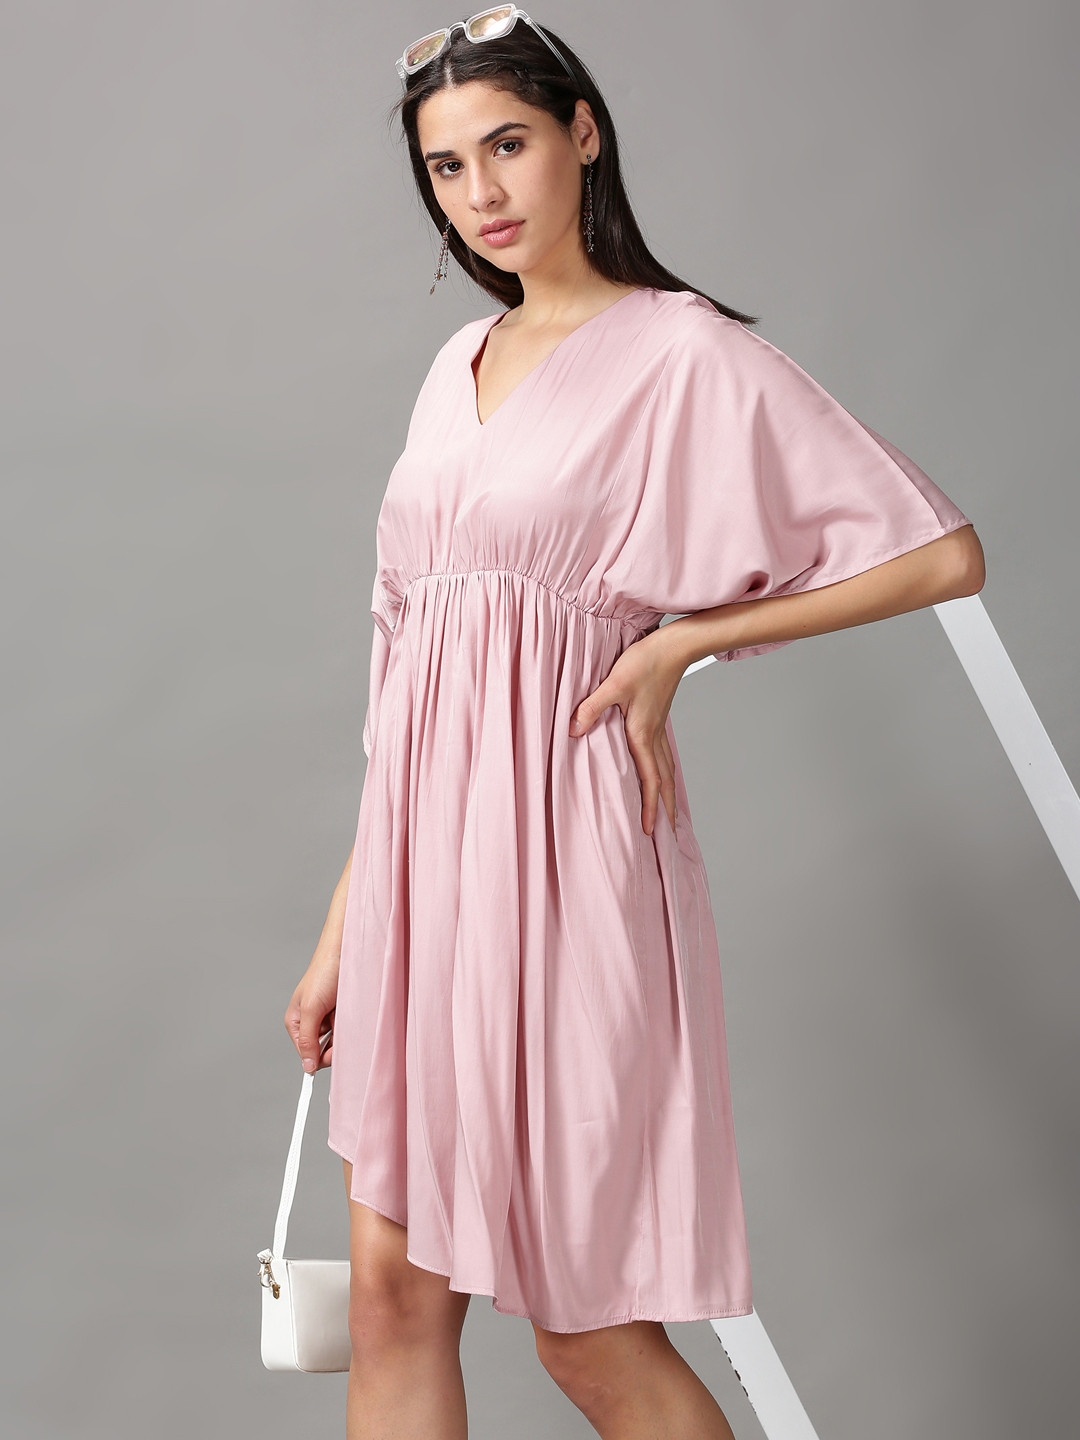 Women's Pink Poly Silk Solid Dresses